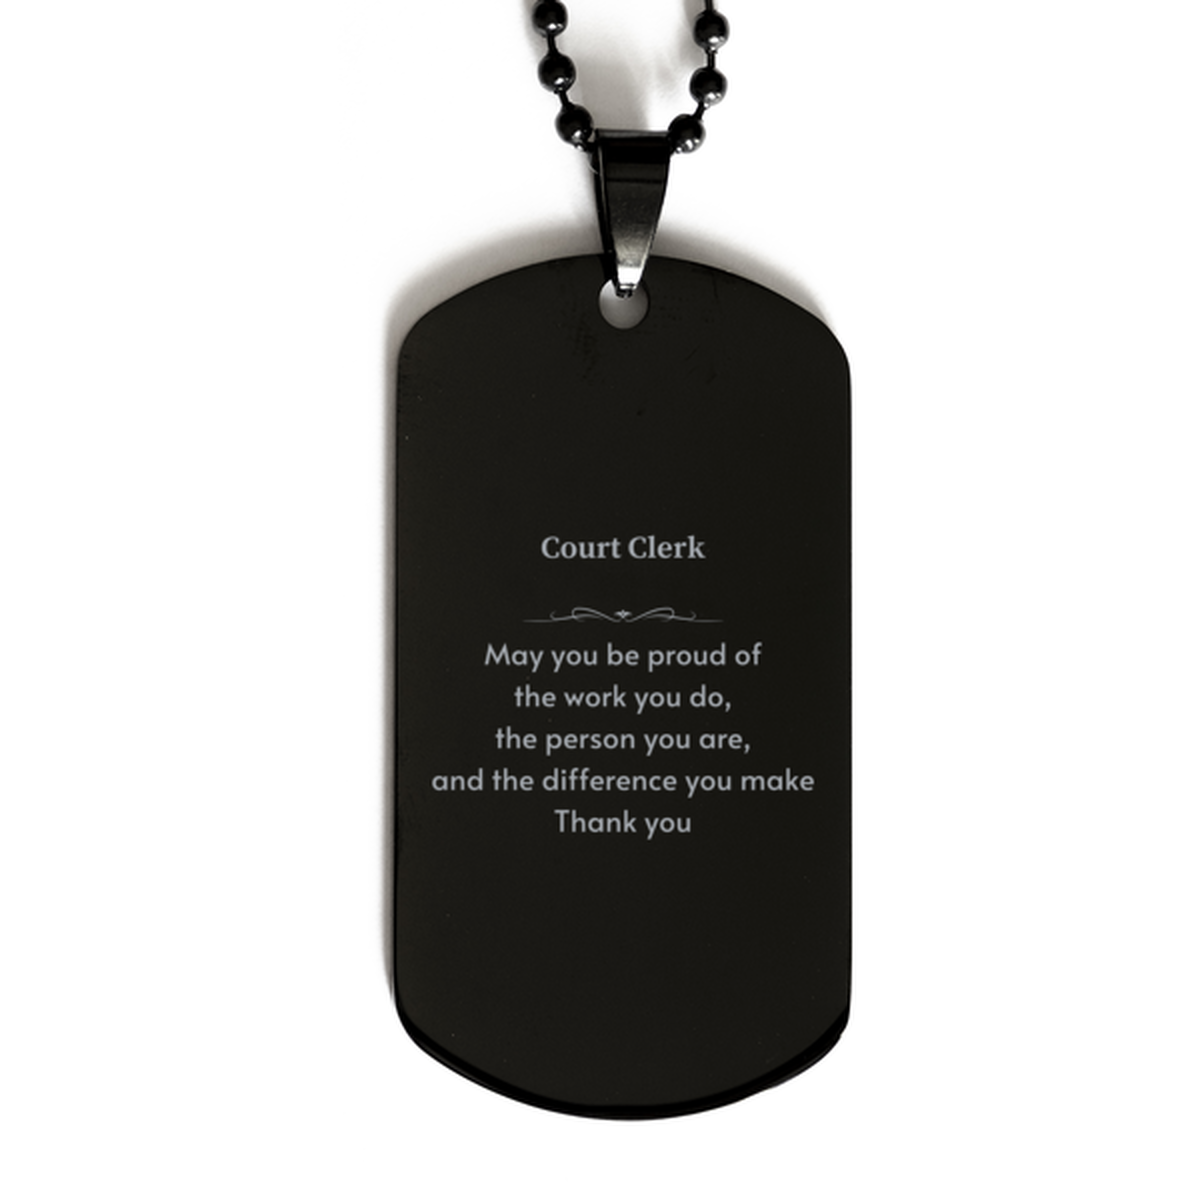 Heartwarming Black Dog Tag Retirement Coworkers Gifts for Court Clerk, Court Clerk May You be proud of the work you do, the person you are Gifts for Boss Men Women Friends